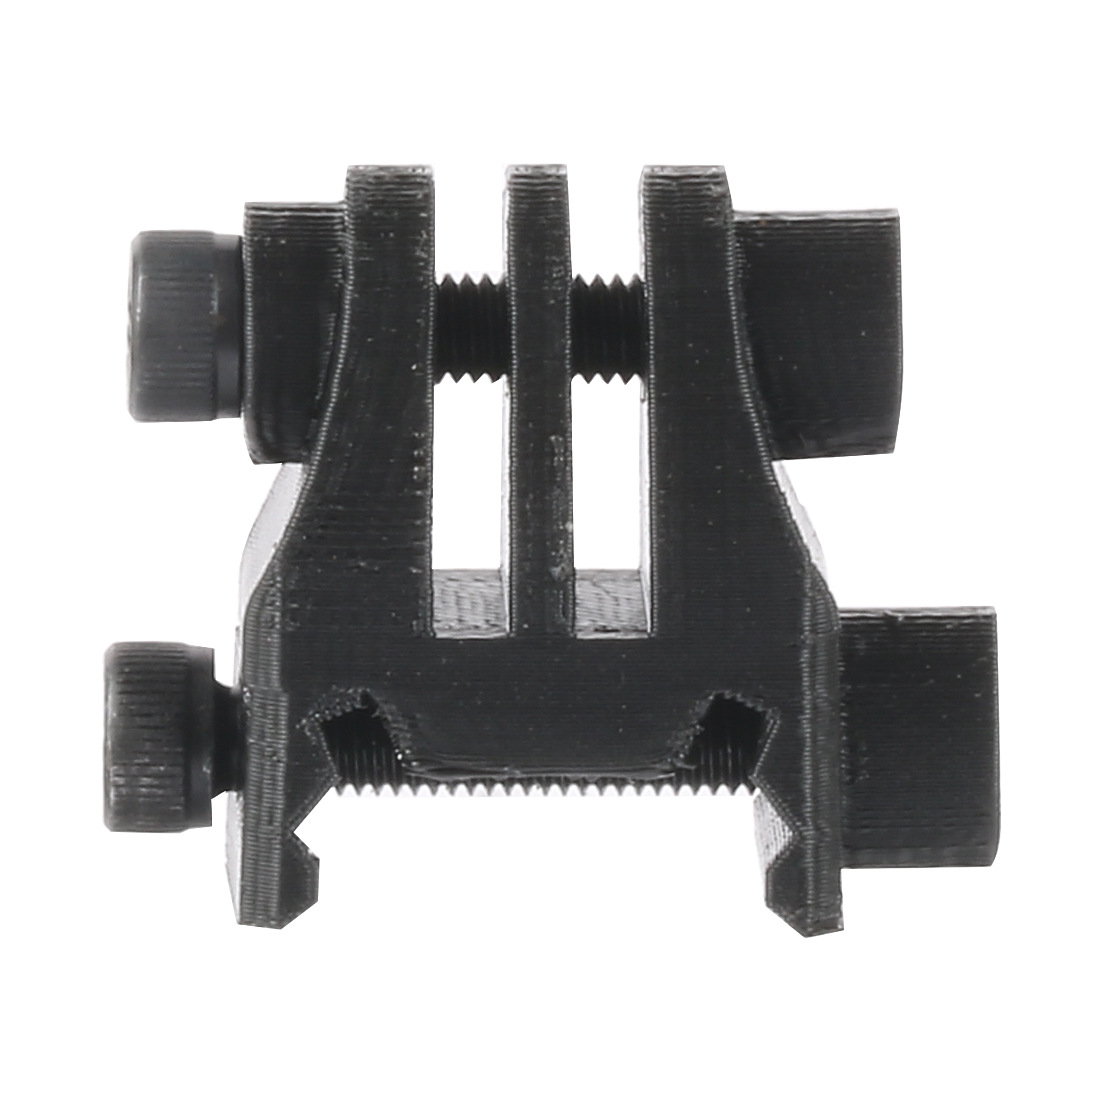 For GOPRO/EKEN Action Camera Mount Guide Lead Rail Adapter Slide Way Clamp Holder Cold Shoe Base 3D Printed for FPV Drone Gimbal - Photo: 4